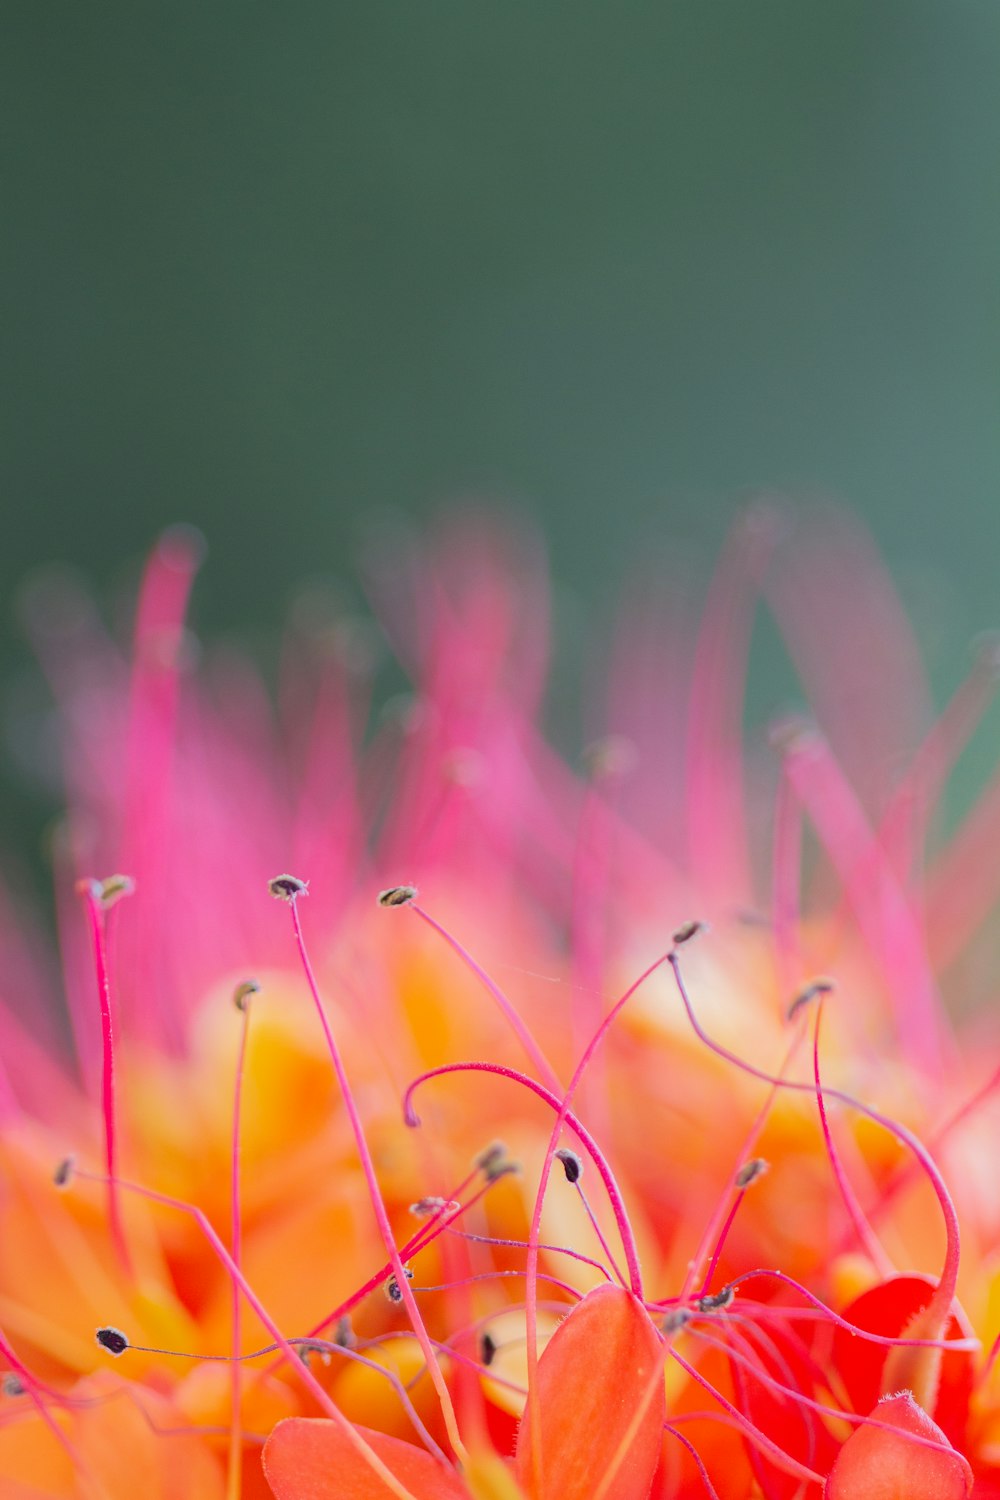 yellow and pink flower in close up photography